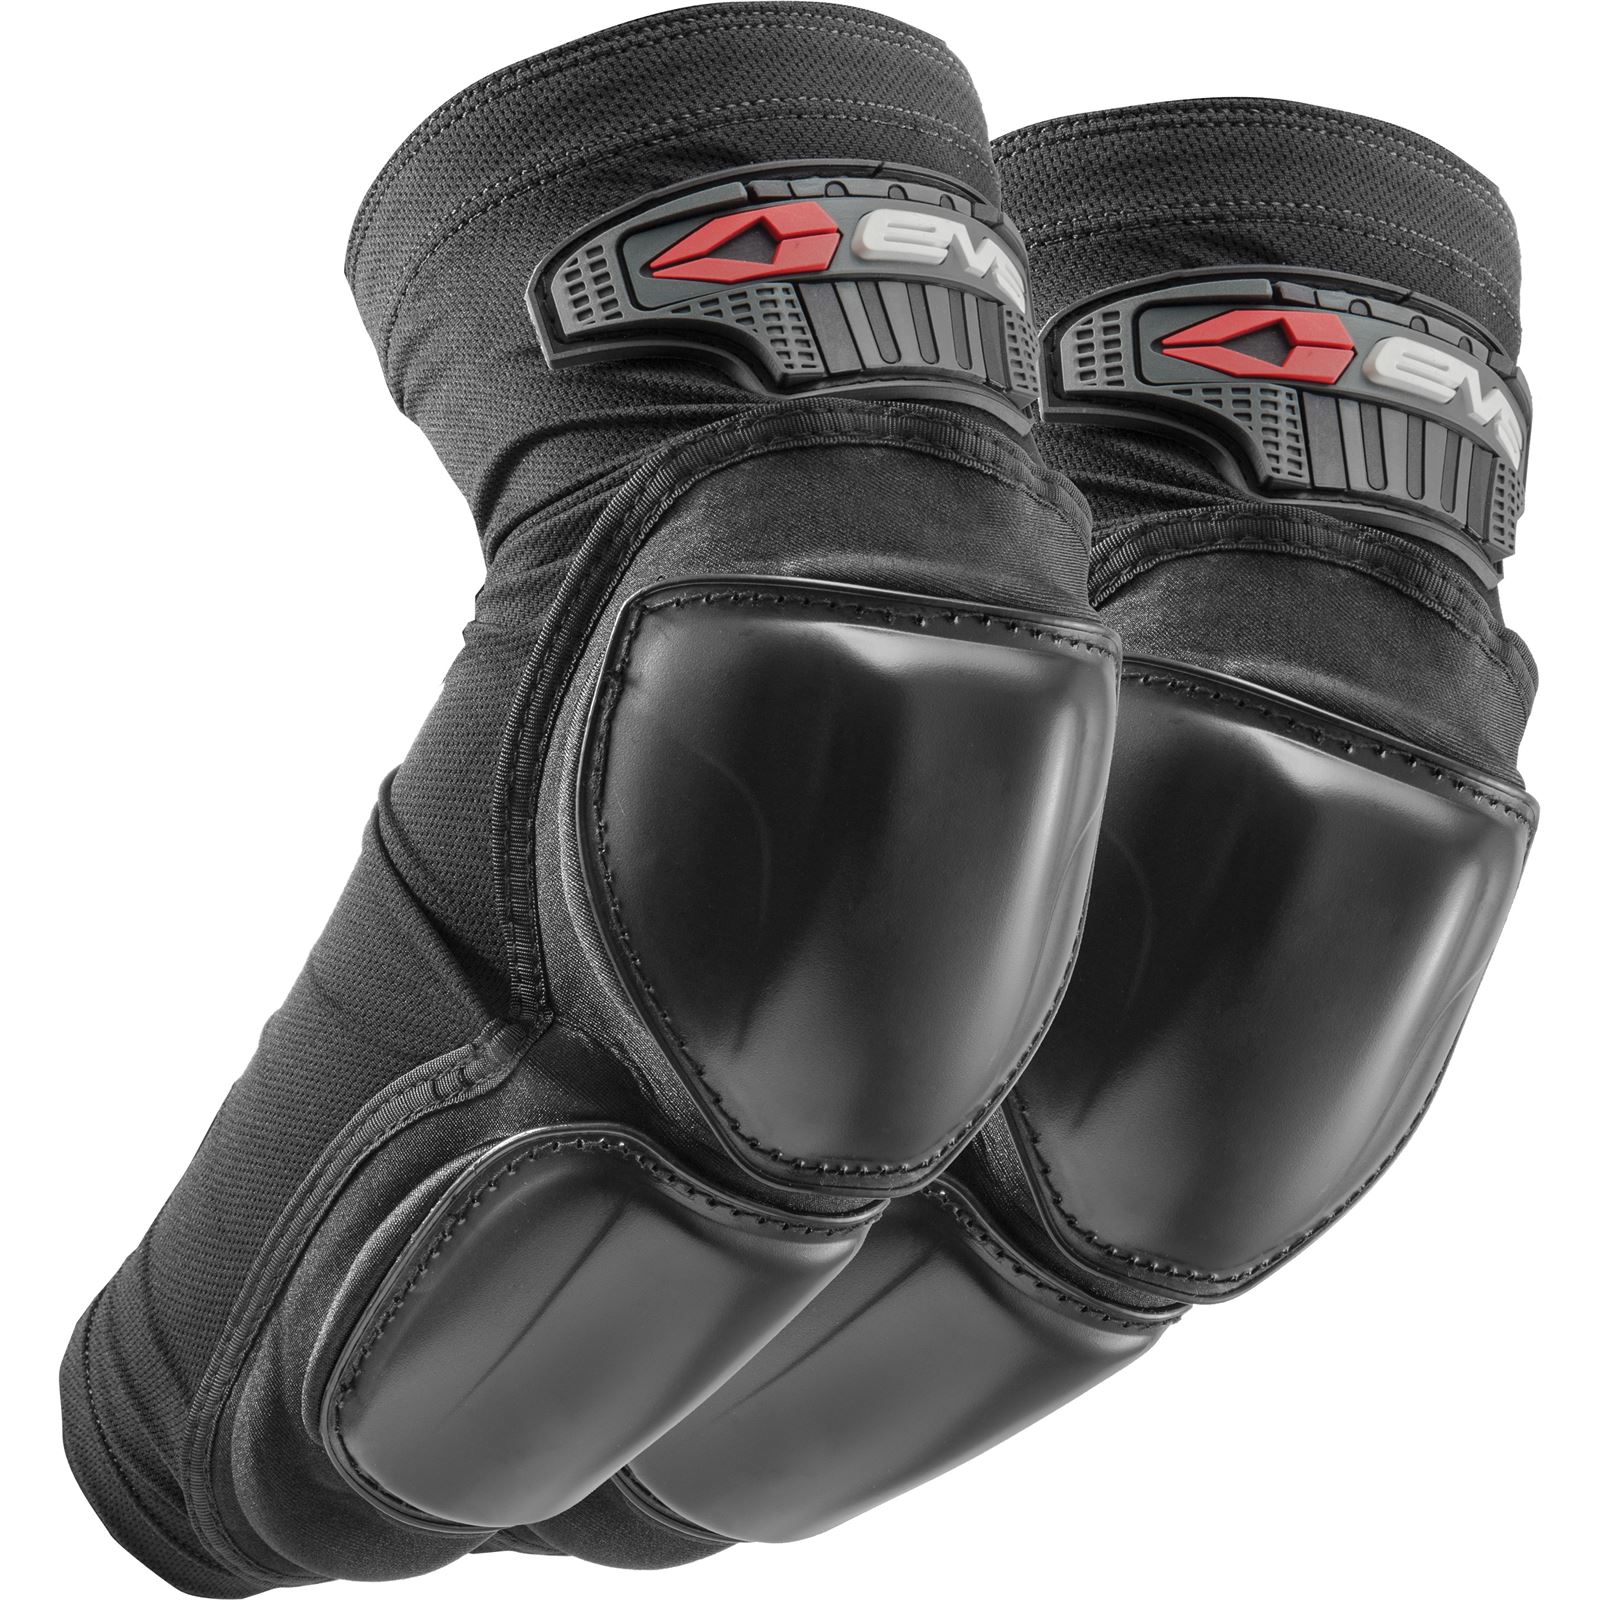 EVS Sports Burly Elbow Guards